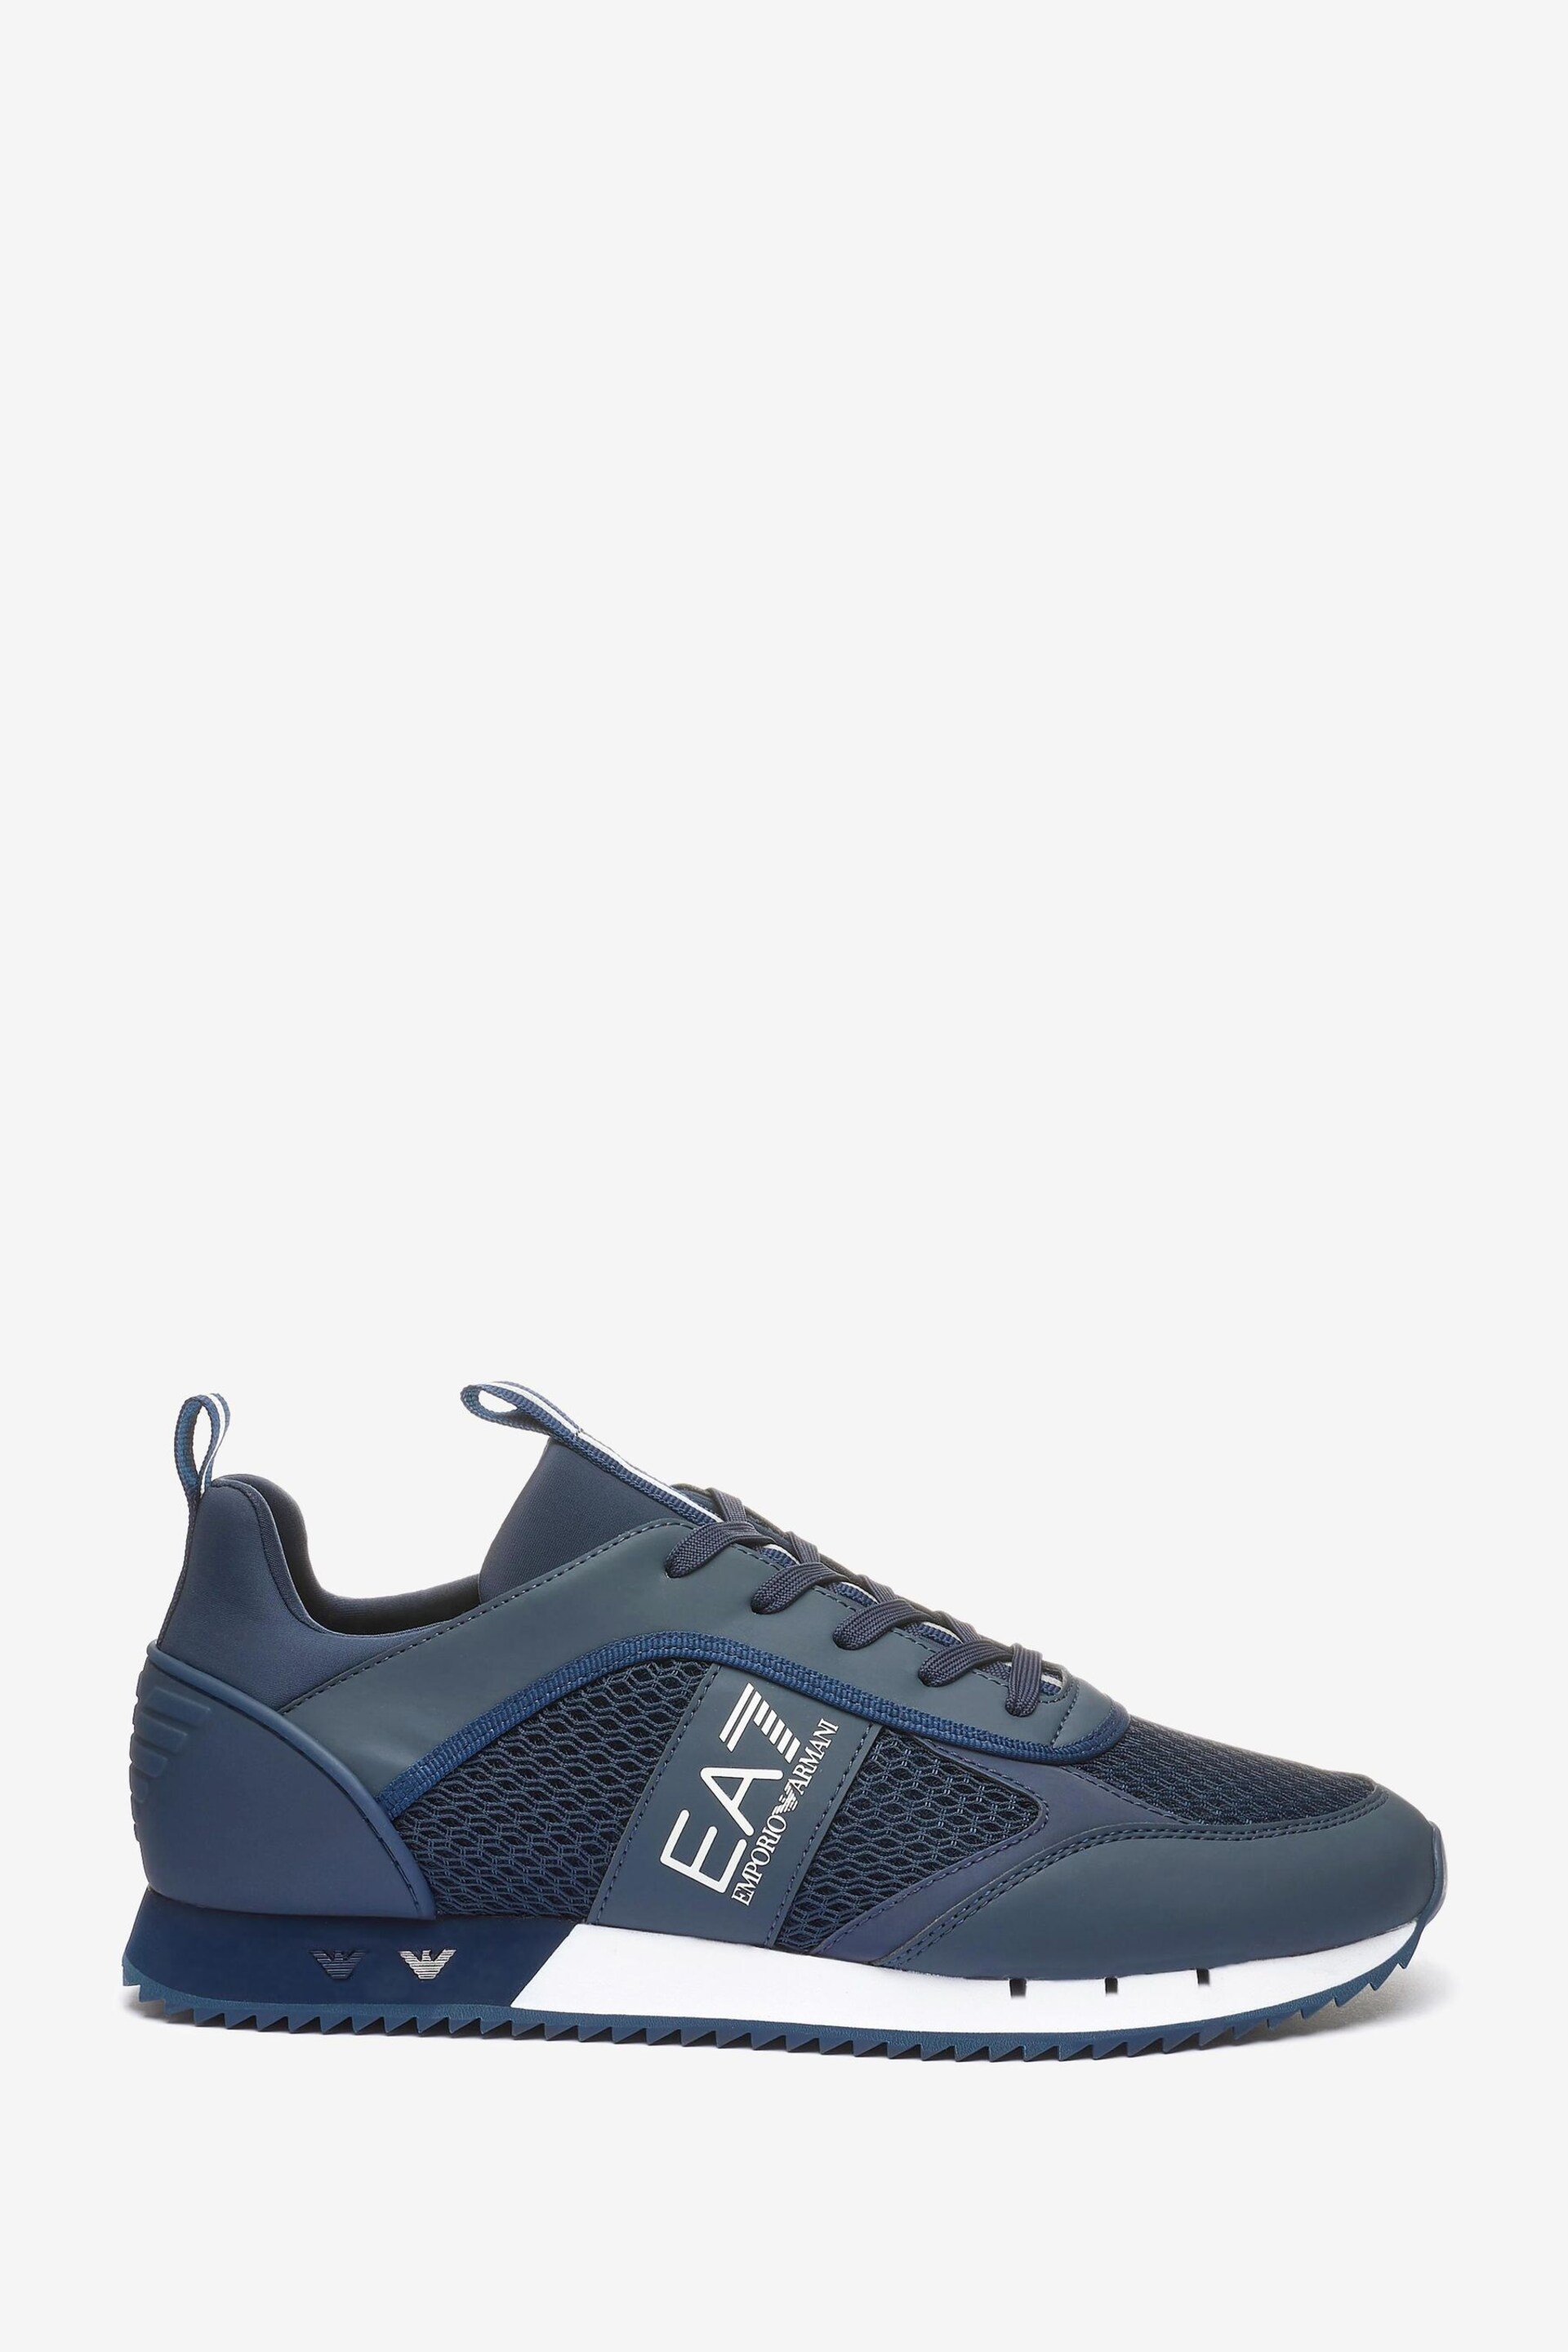 Emporio Armani EA7 Evolution Lace-Up Racer Trainers - Image 1 of 4